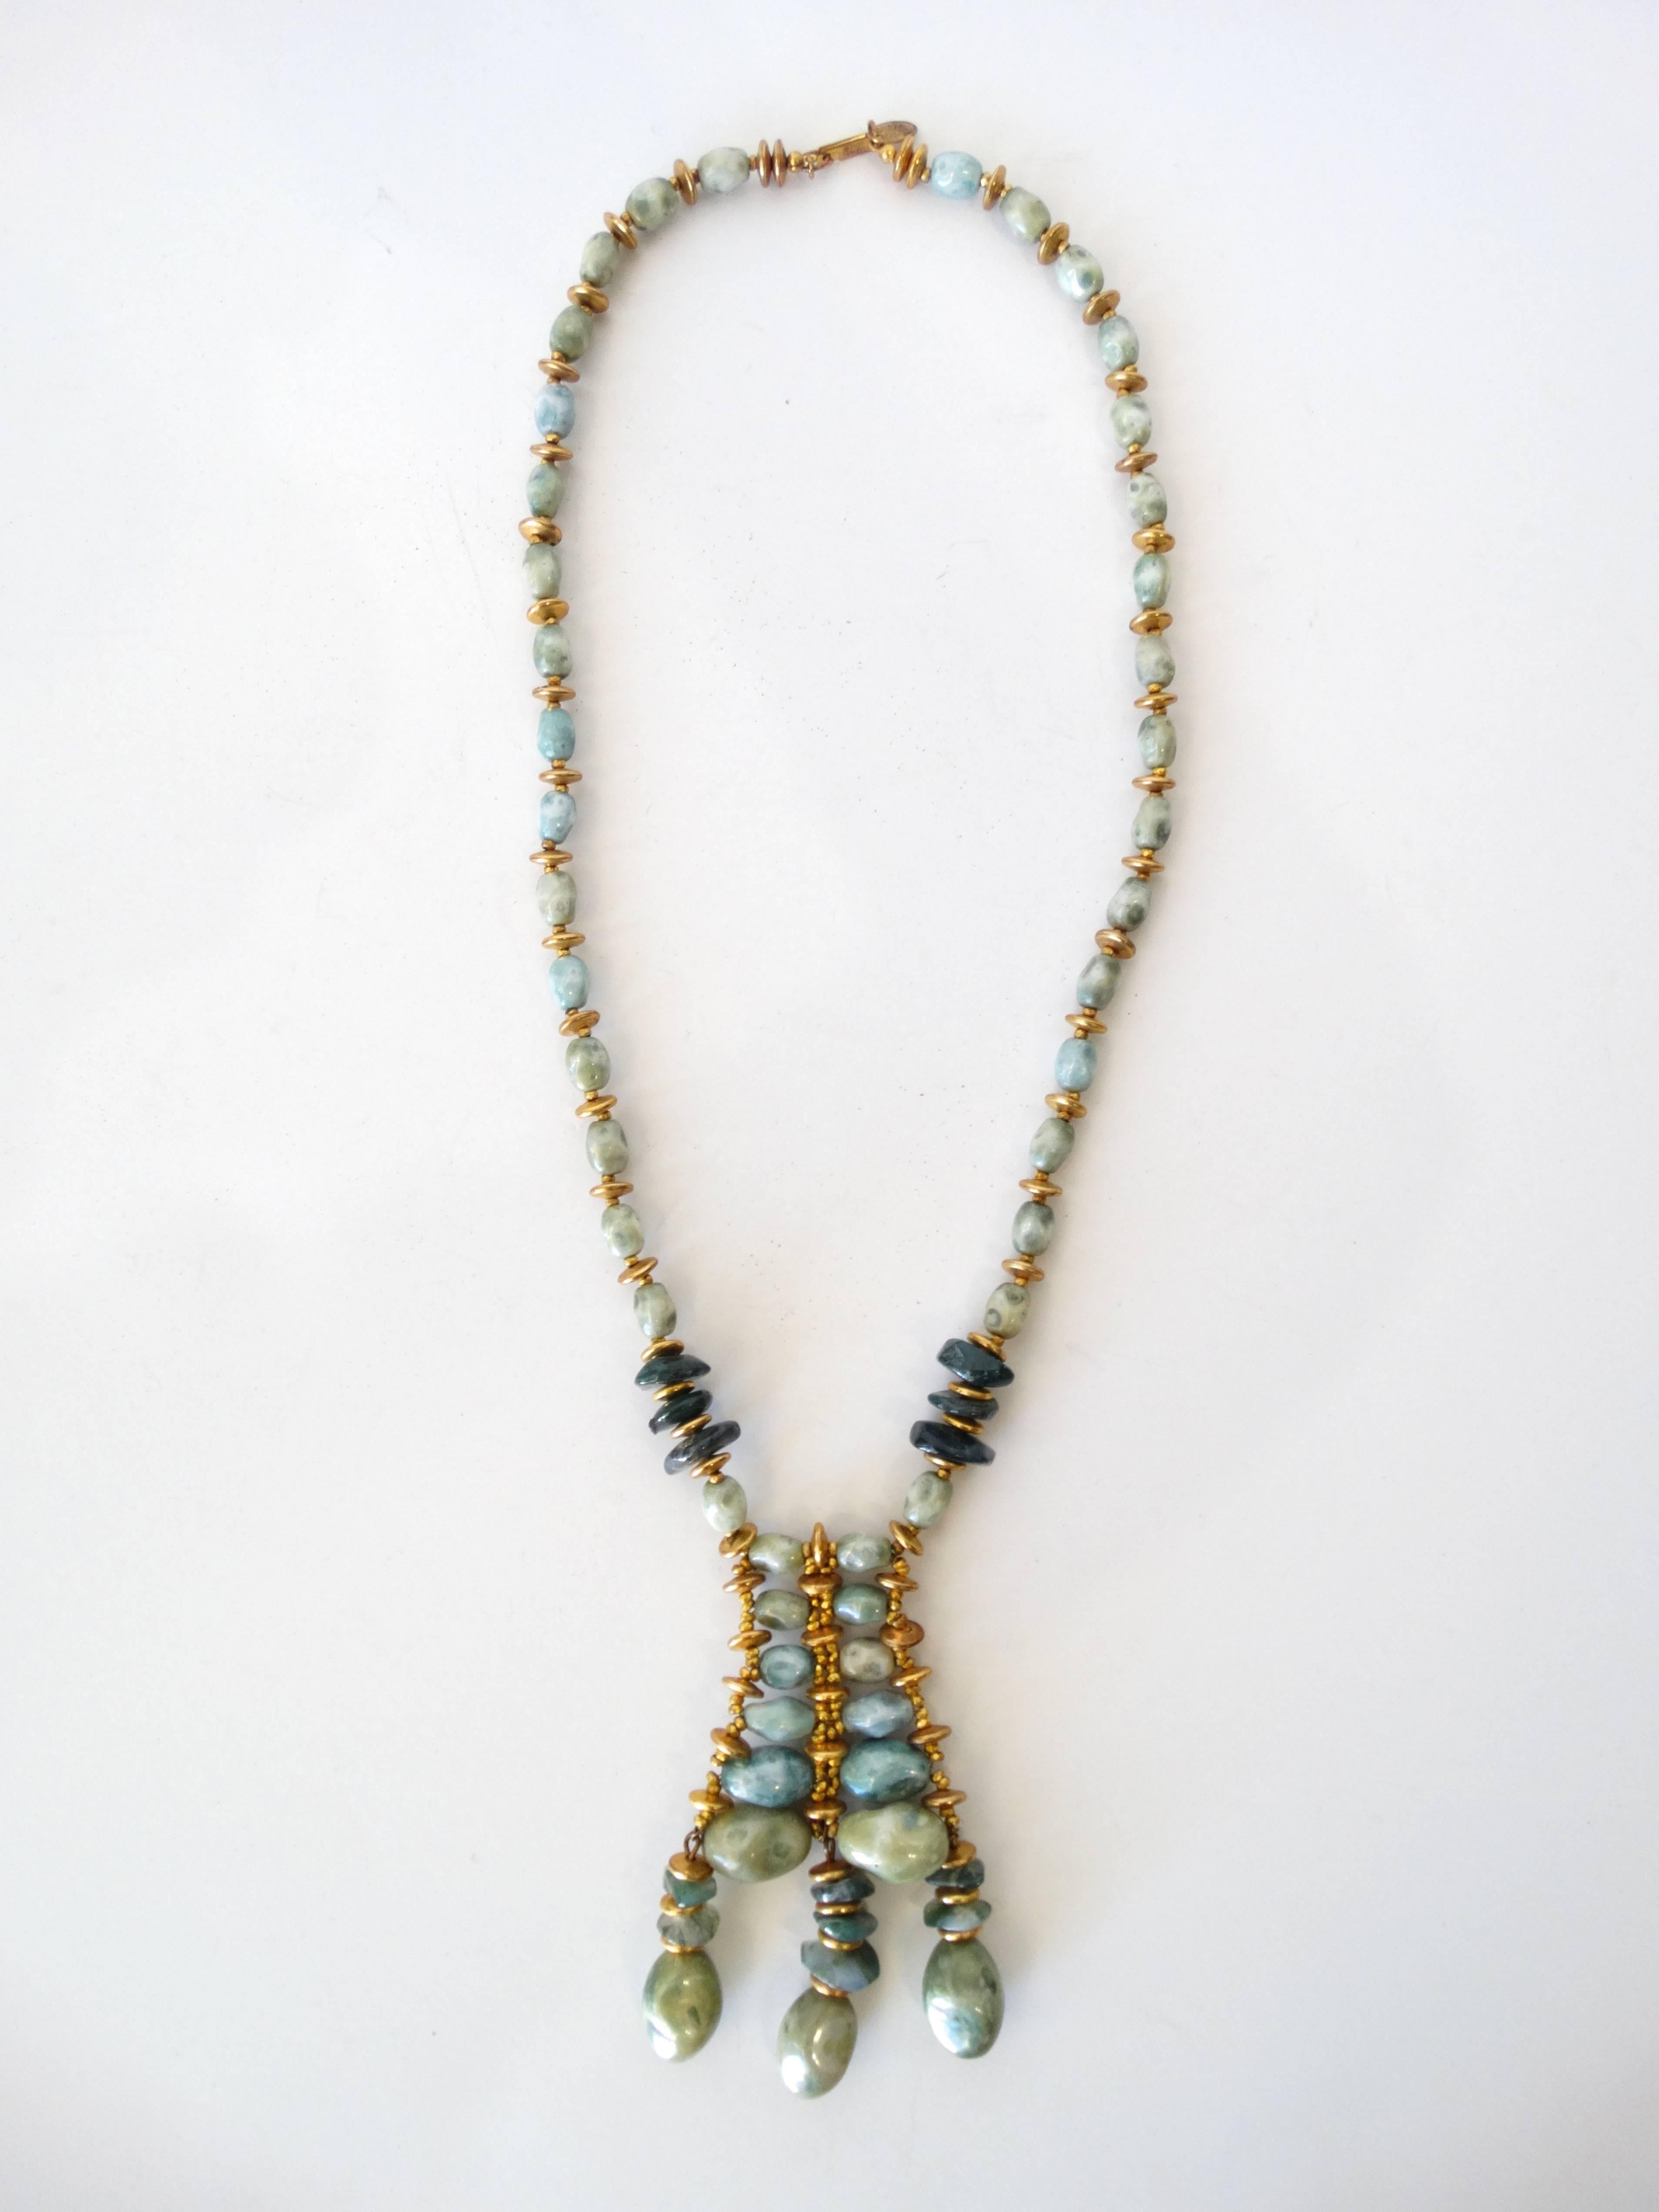 Incredible stone necklace from iconic jewelry designer from Miriam Haskell! Single strand necklace beaded with green and gold toned beads. Comes down to intricate bead pendant, crafted from the same stones and gold beads, accented with three drop